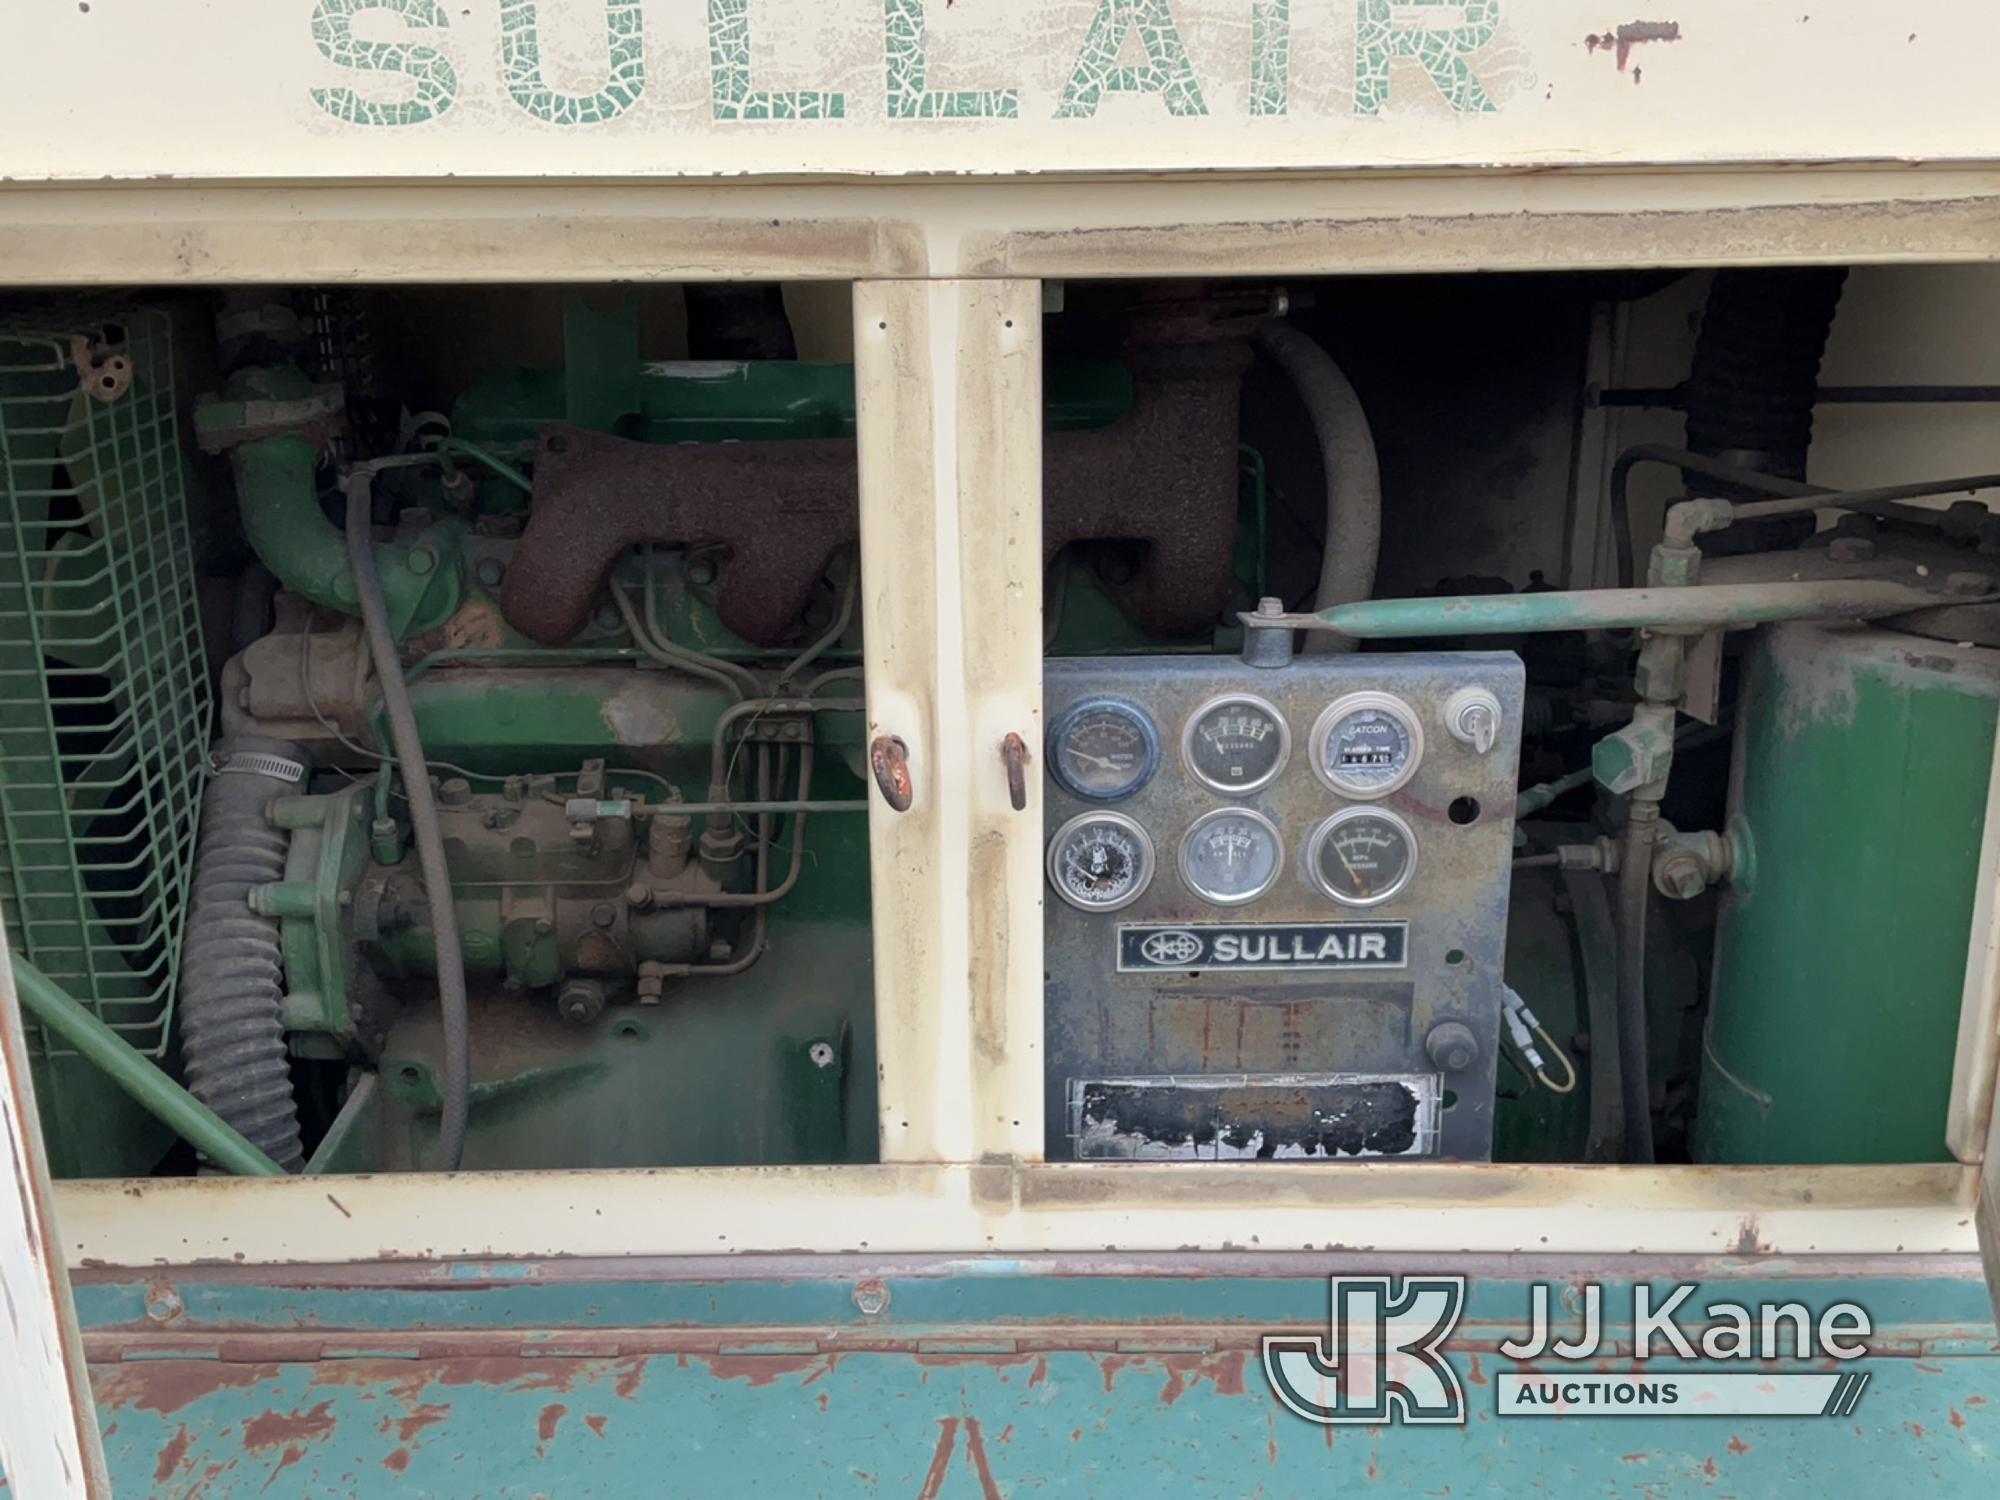 (Conway, AR) Sullair 185 Portable Air Compressor, trailer mtd No Title) (Cranks On Jump Pack, Will N